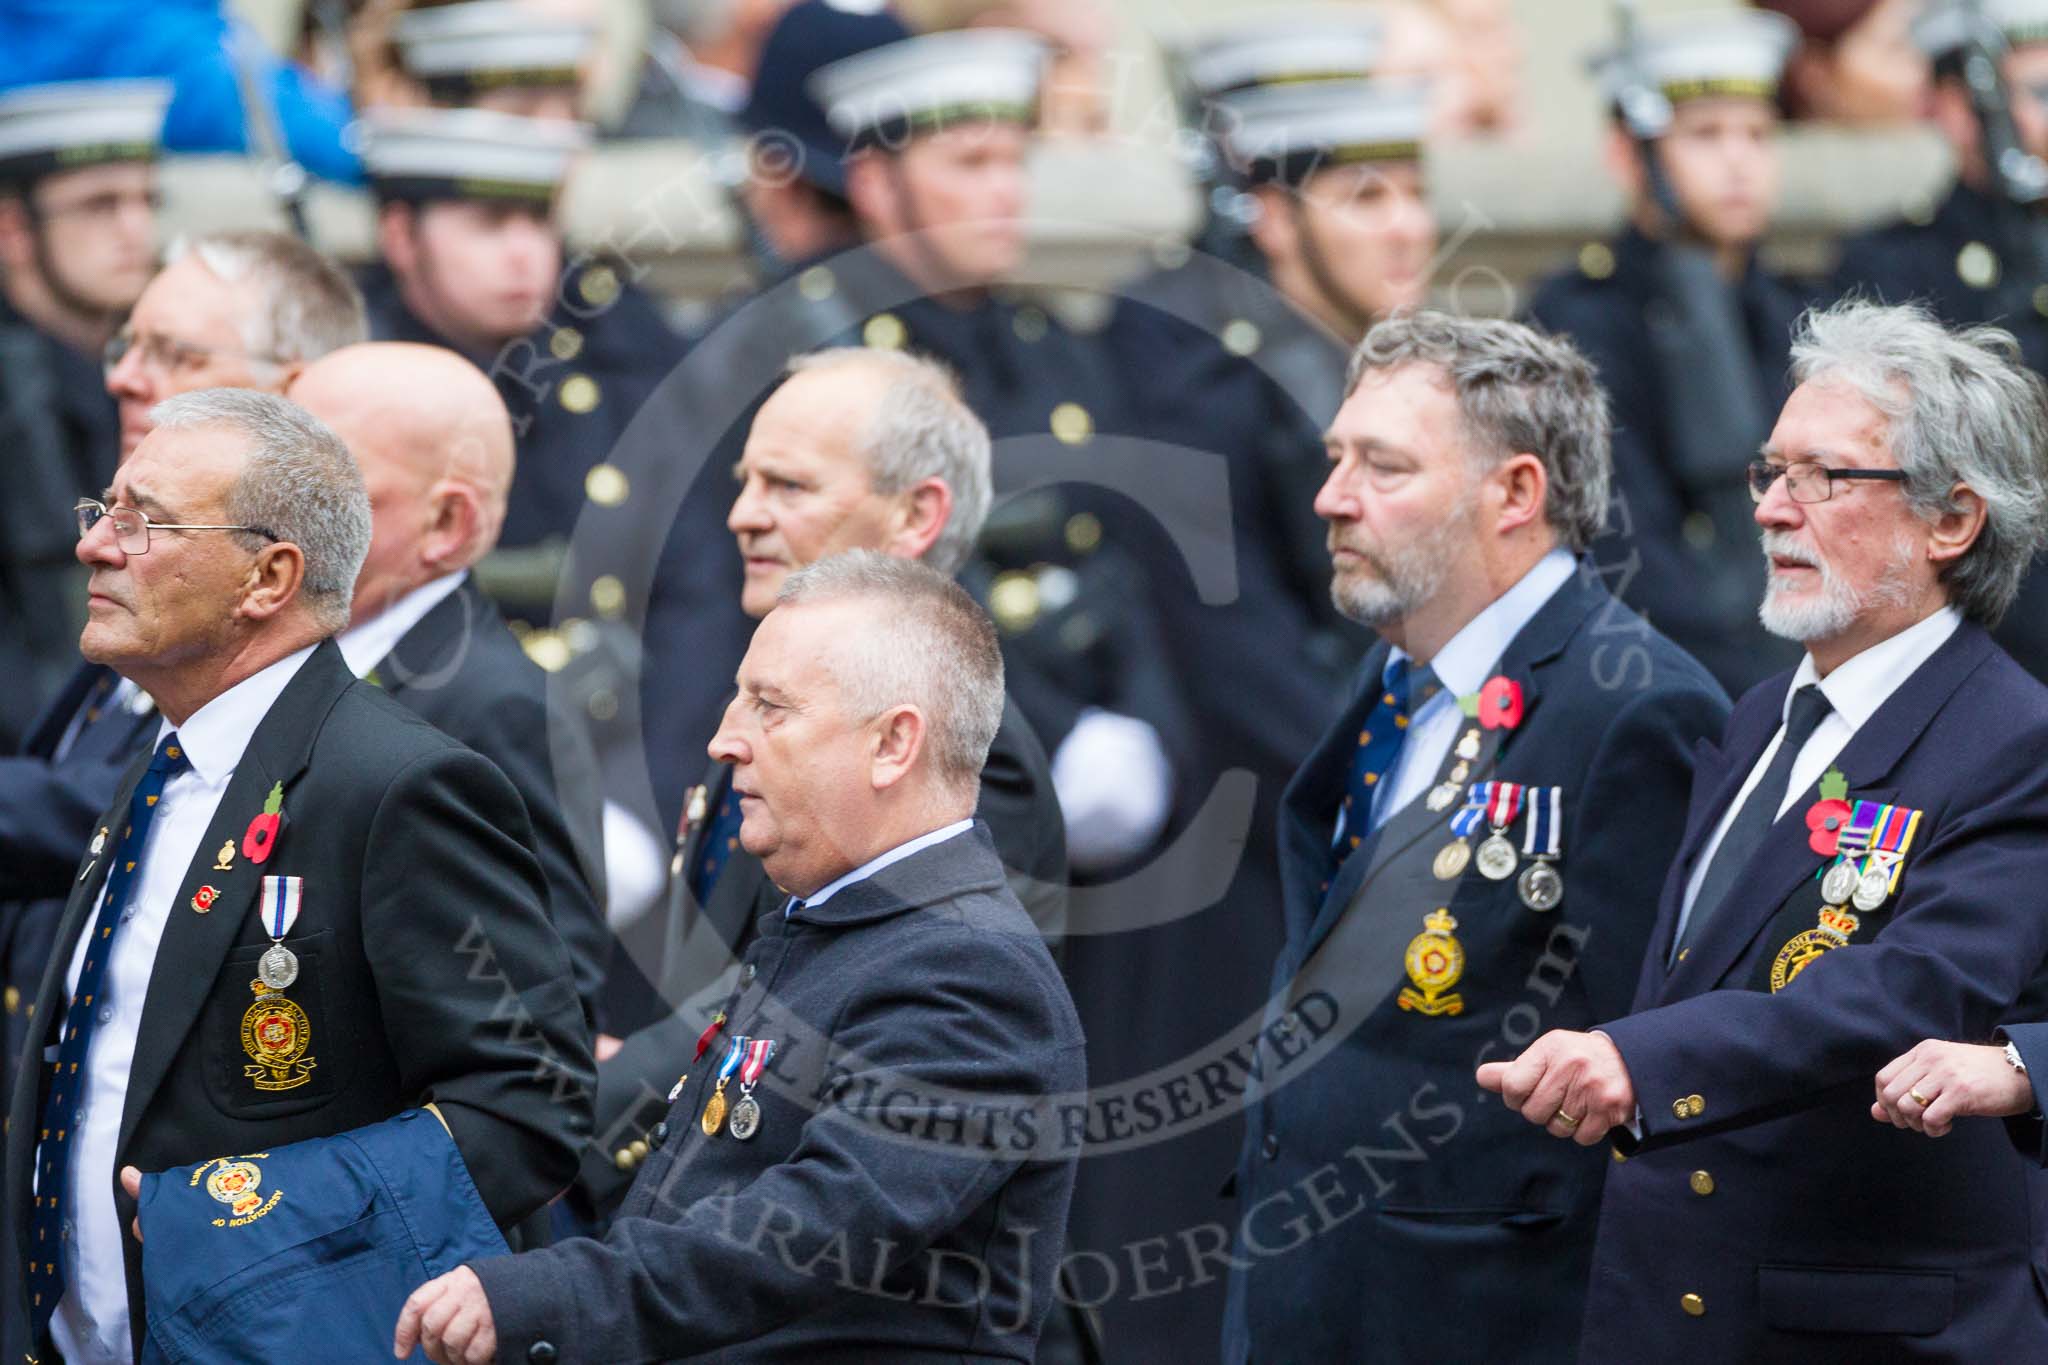 Remembrance Sunday at the Cenotaph 2015: Group E26, Association of Royal Yachtsmen.
Cenotaph, Whitehall, London SW1,
London,
Greater London,
United Kingdom,
on 08 November 2015 at 12:02, image #938